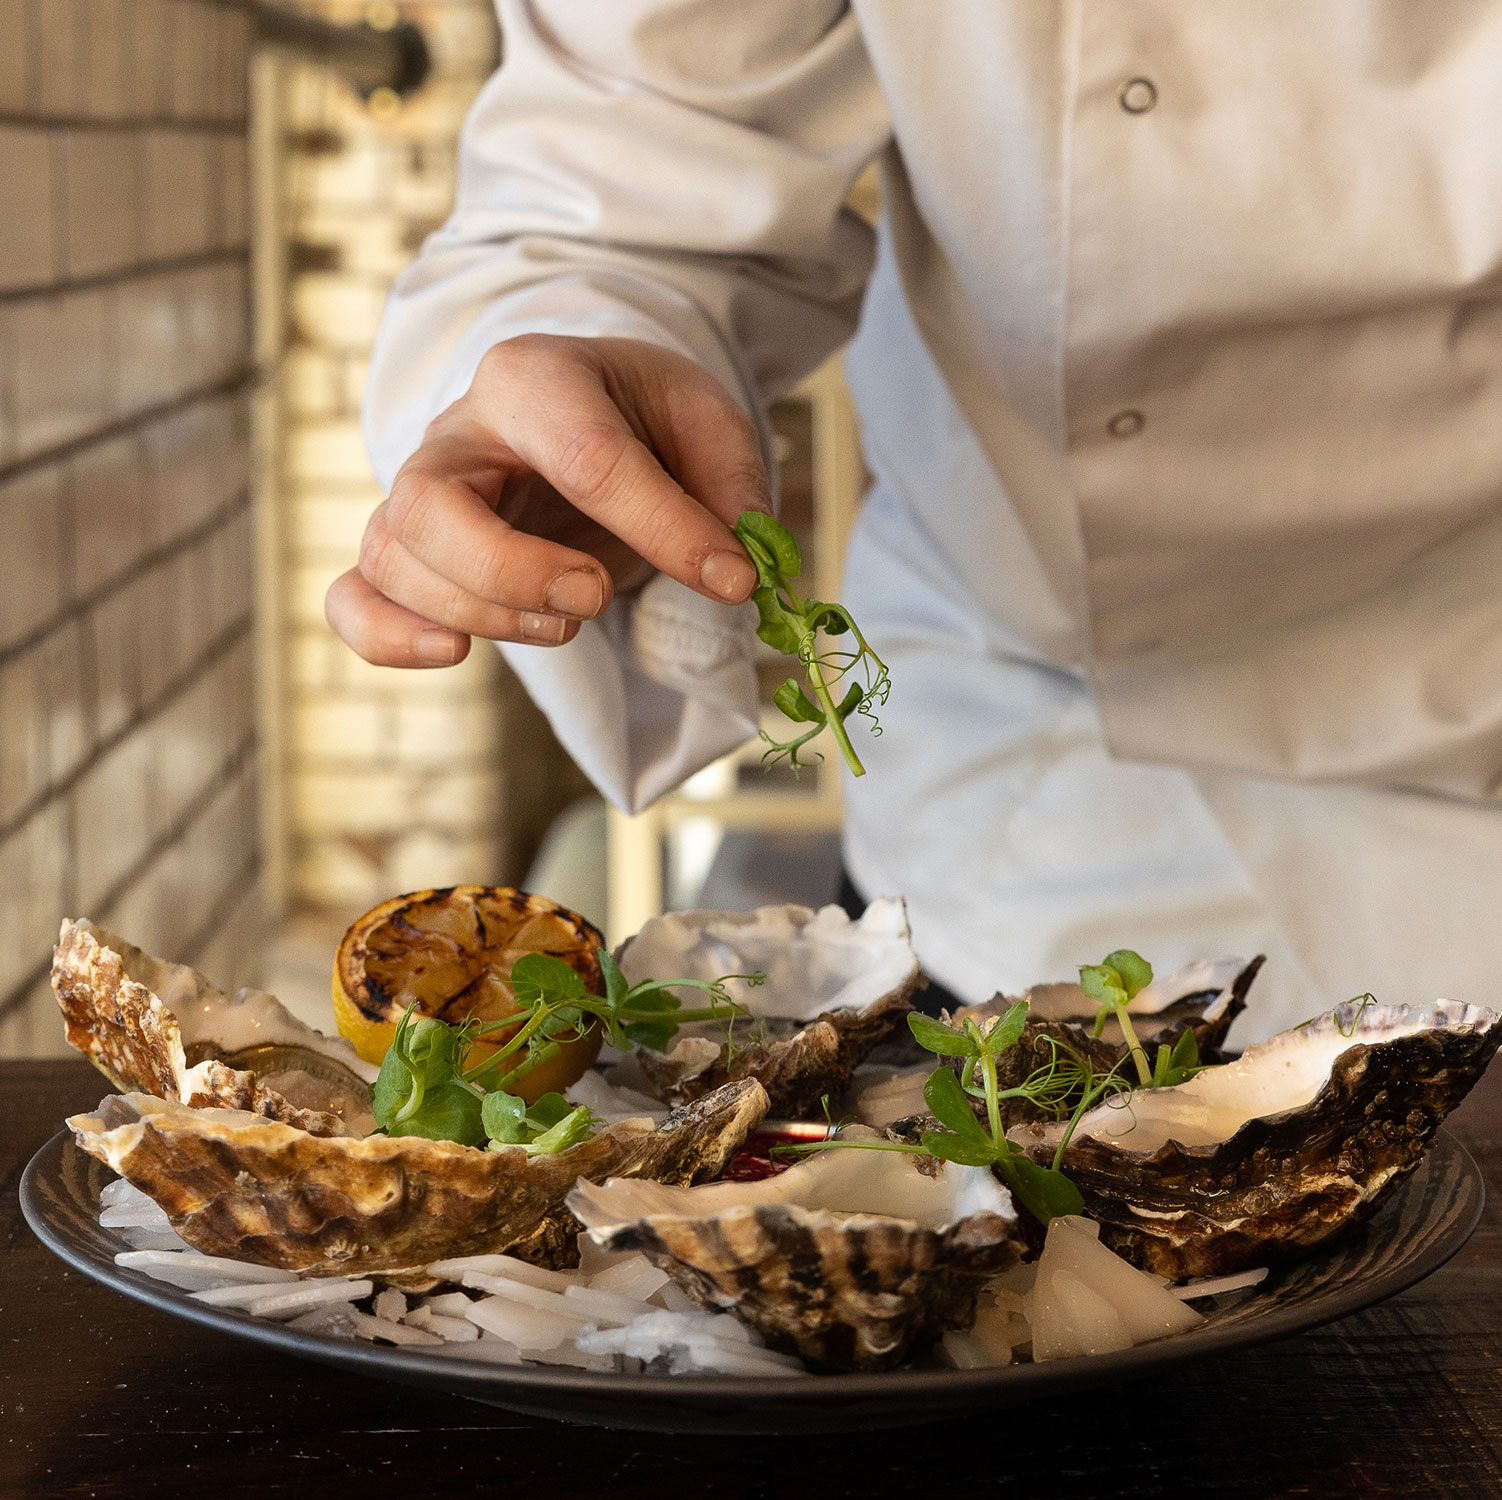 Chef dressing a plate of oysters with cress, plate is on a dark table